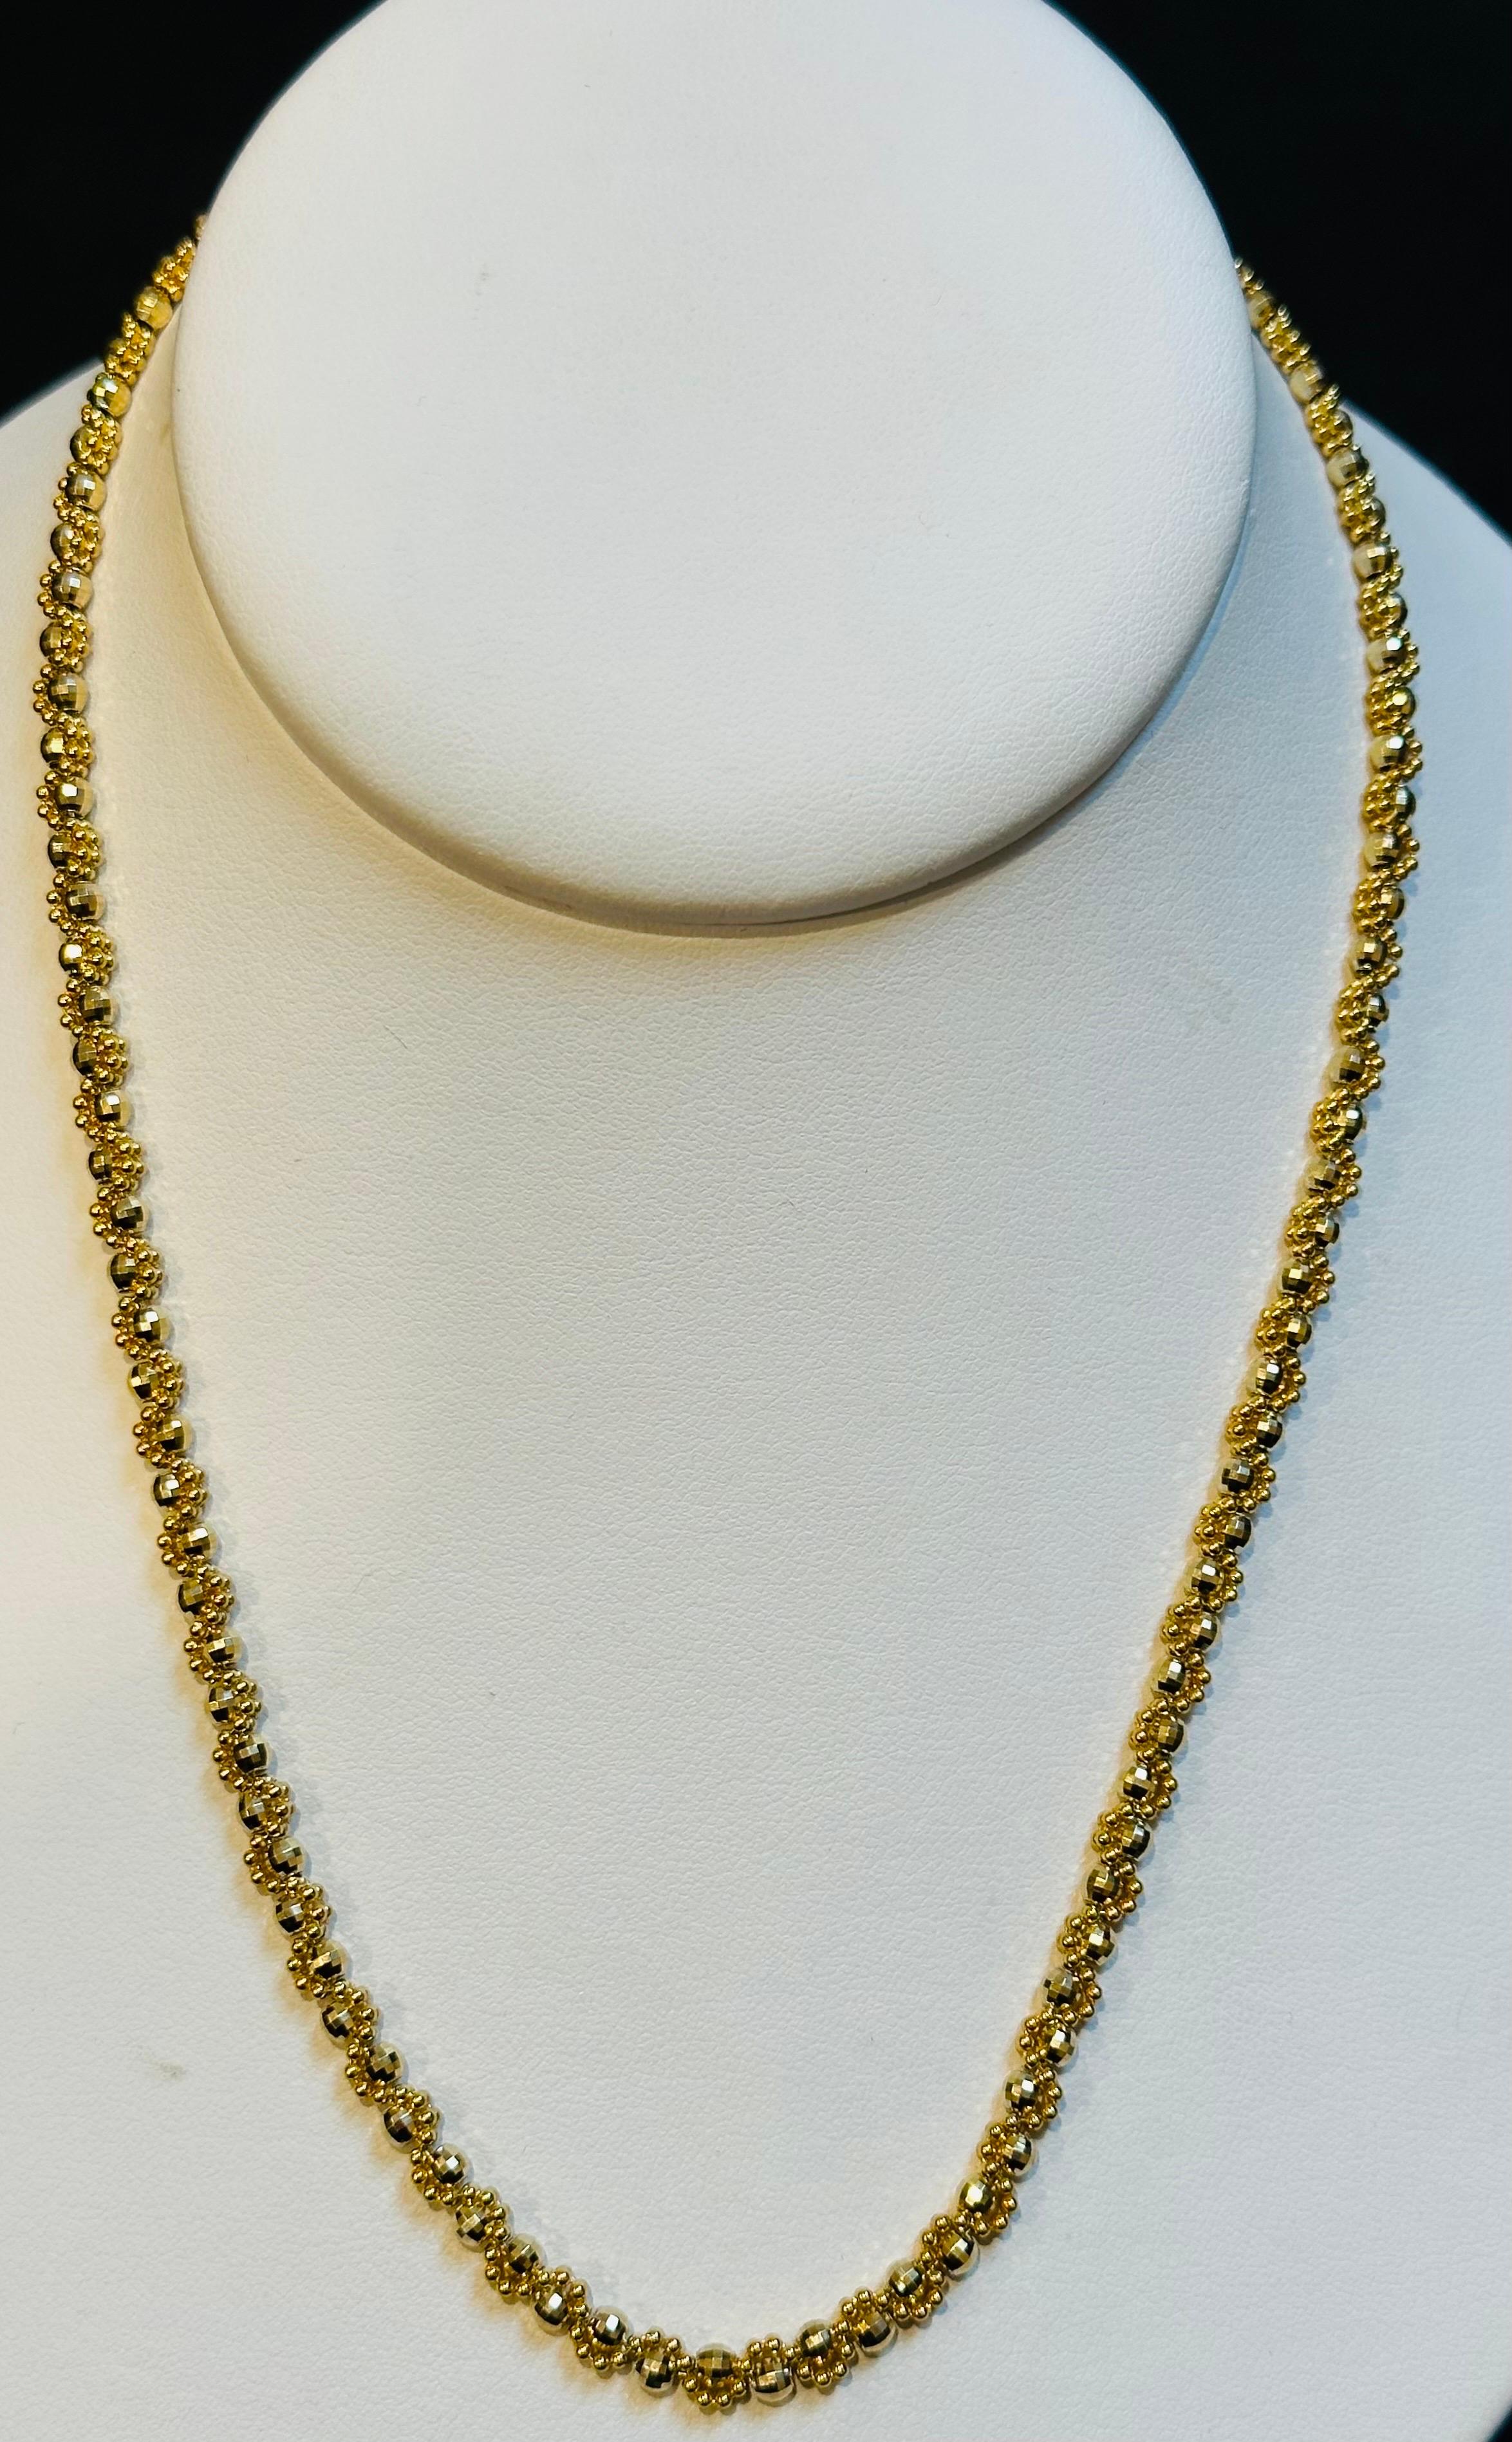 Vintage 14 Karat Yellow Gold 13 Gm, Twisted Chains with Balls in Between

4.0  MM wide
17 